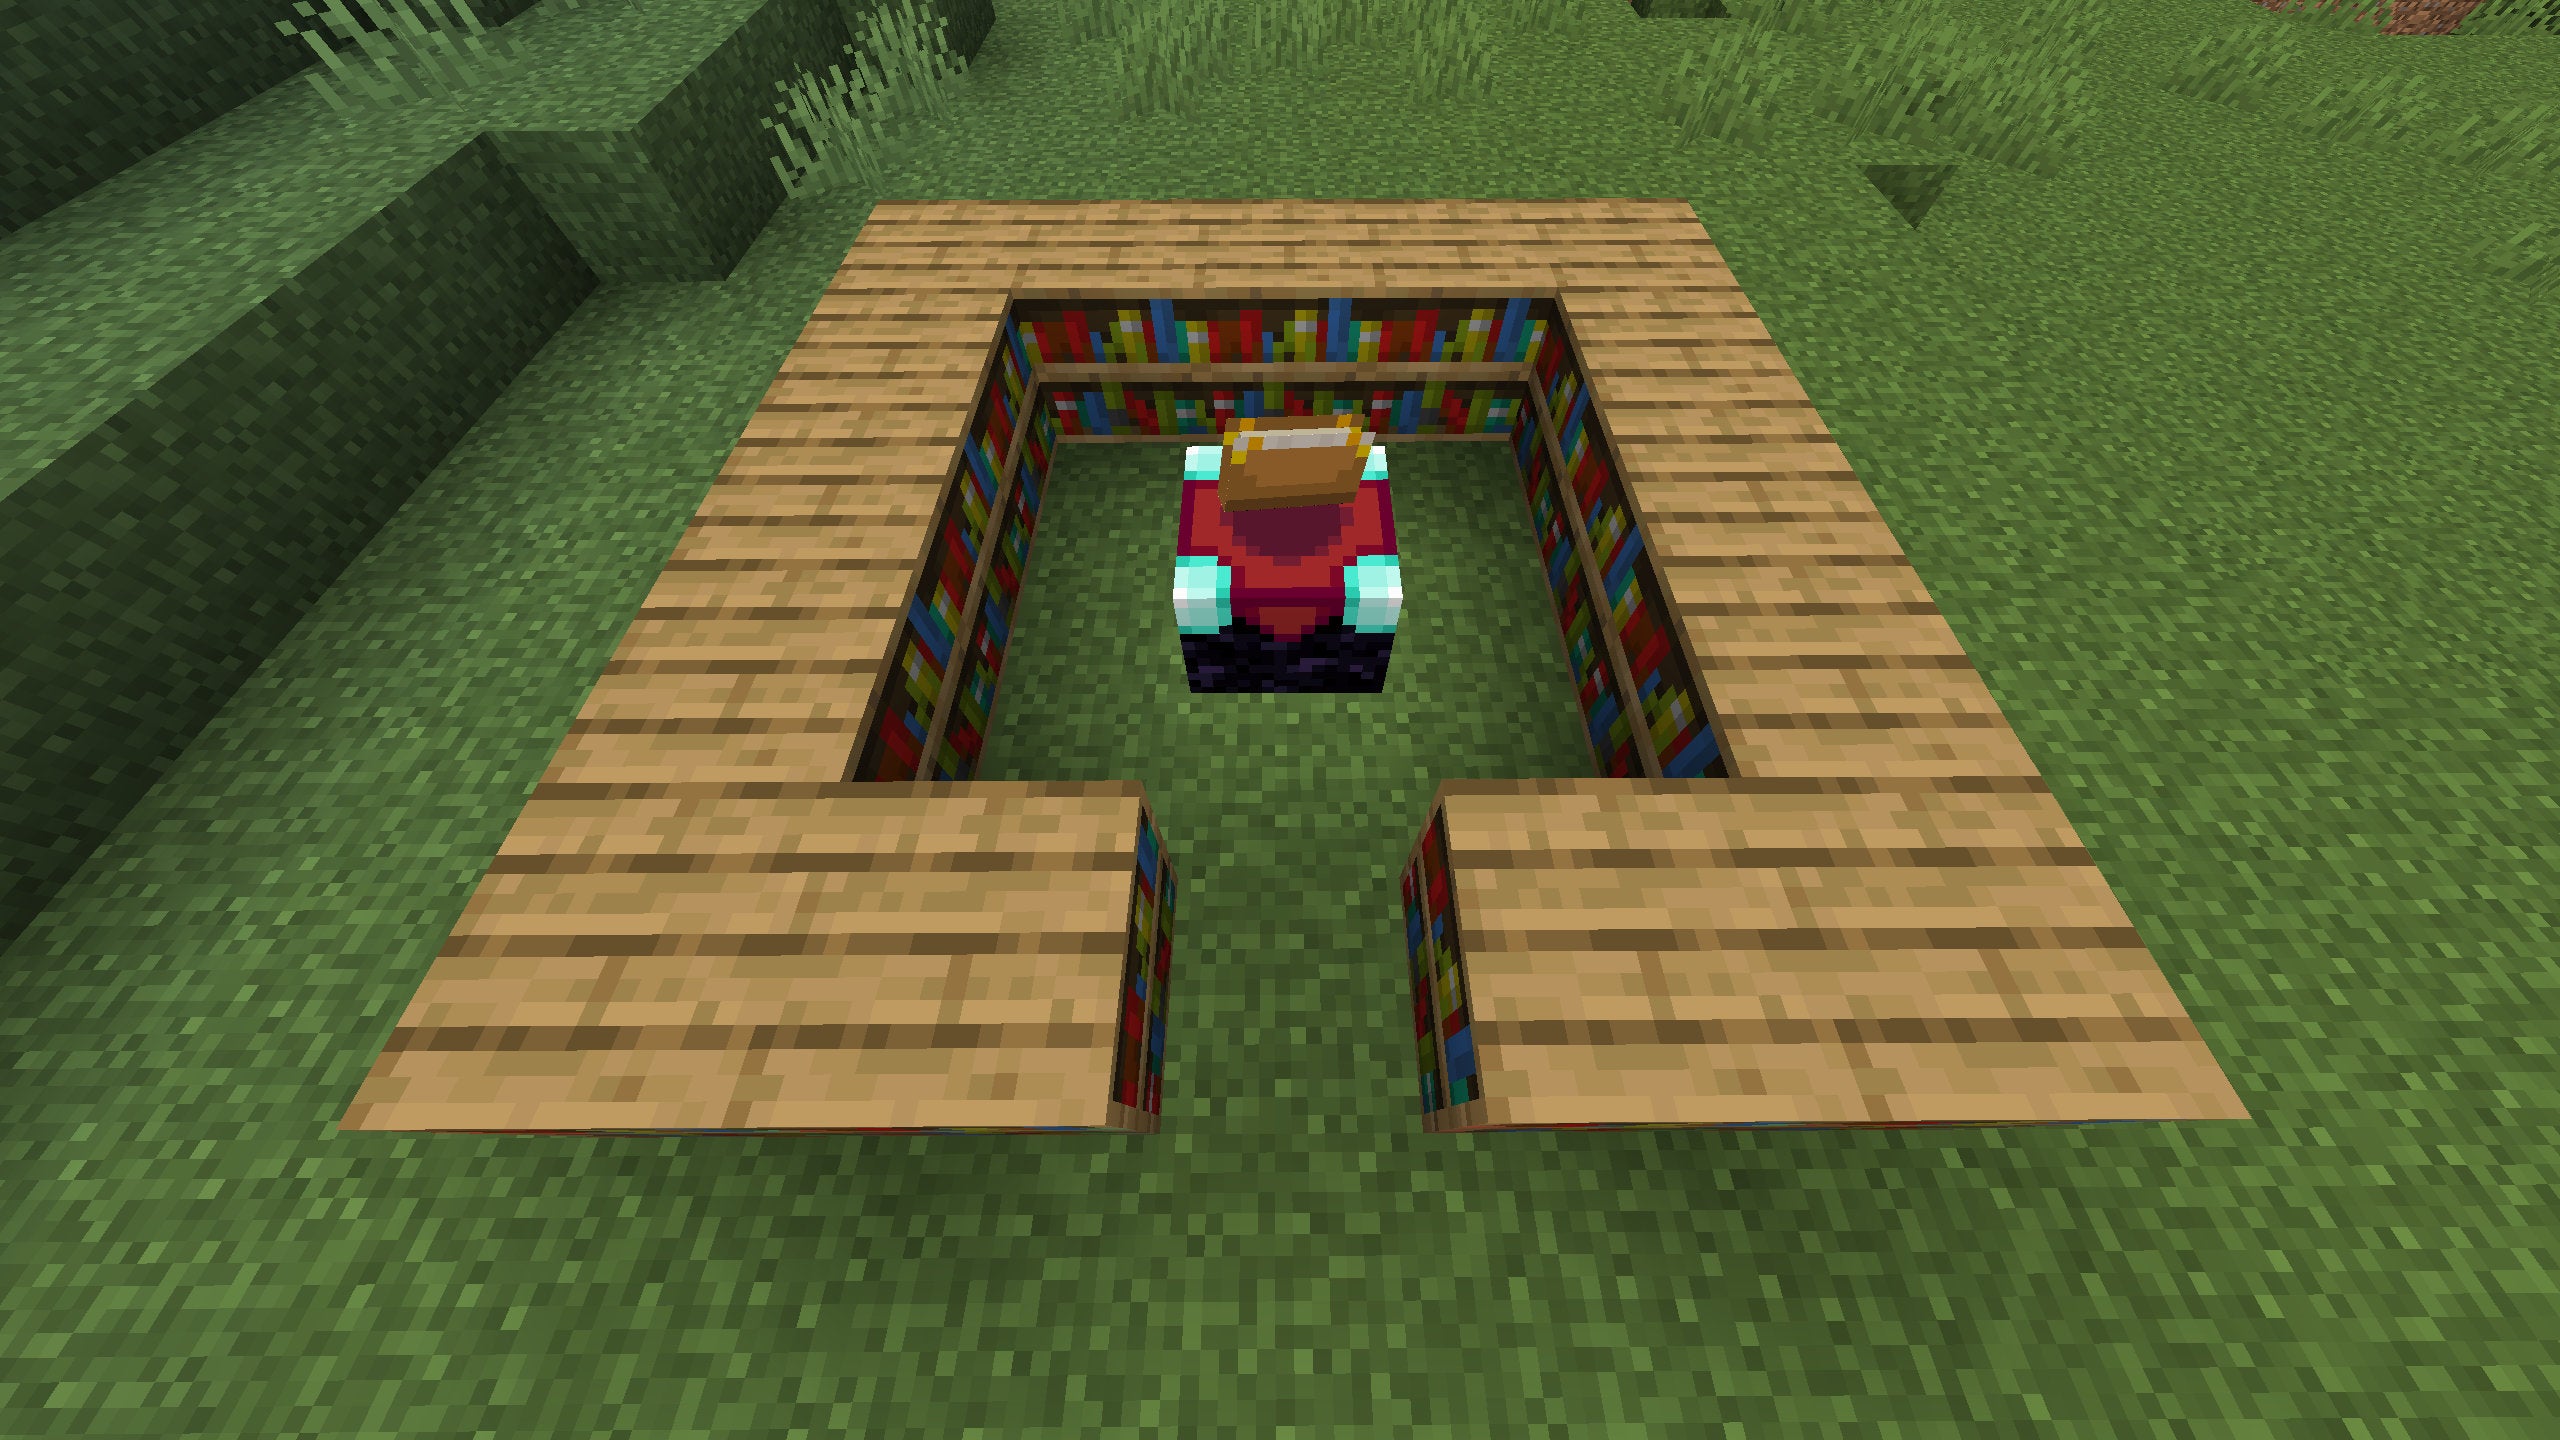 Enchanting a Netherite Sword using a Minecraft Enchanting Table.